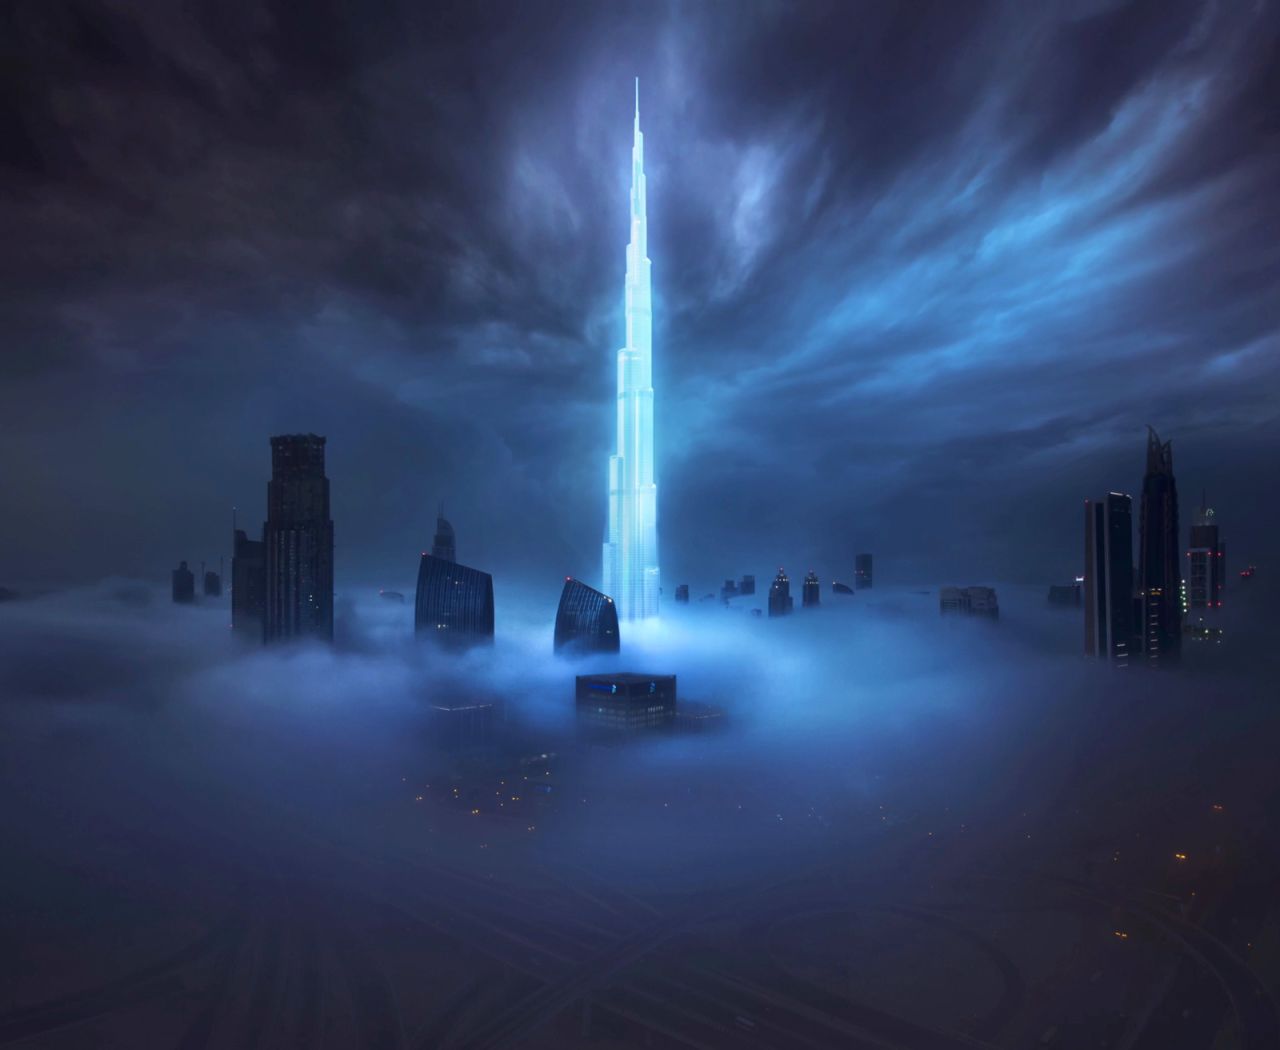 Photographer and visual artist Baber Afzal captures Dubai in a unique light in his ethereal images. Pictured here: Luminous, 2016, a collaboration with Michal Klimczak. 